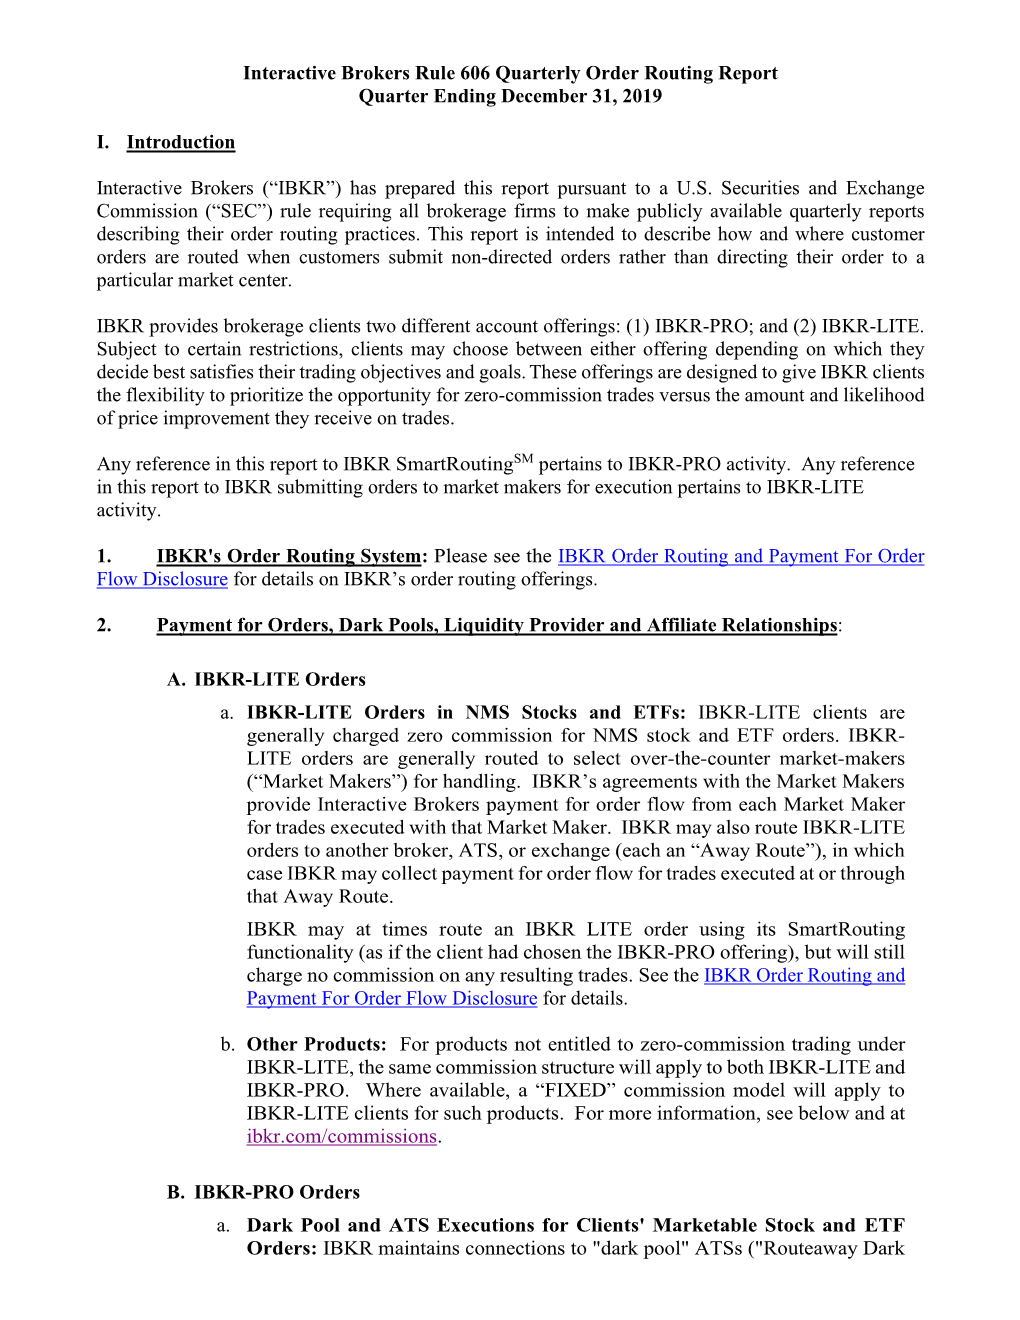 Interactive Brokers Rule 606 Quarterly Order Routing Report Quarter Ending December 31, 2019